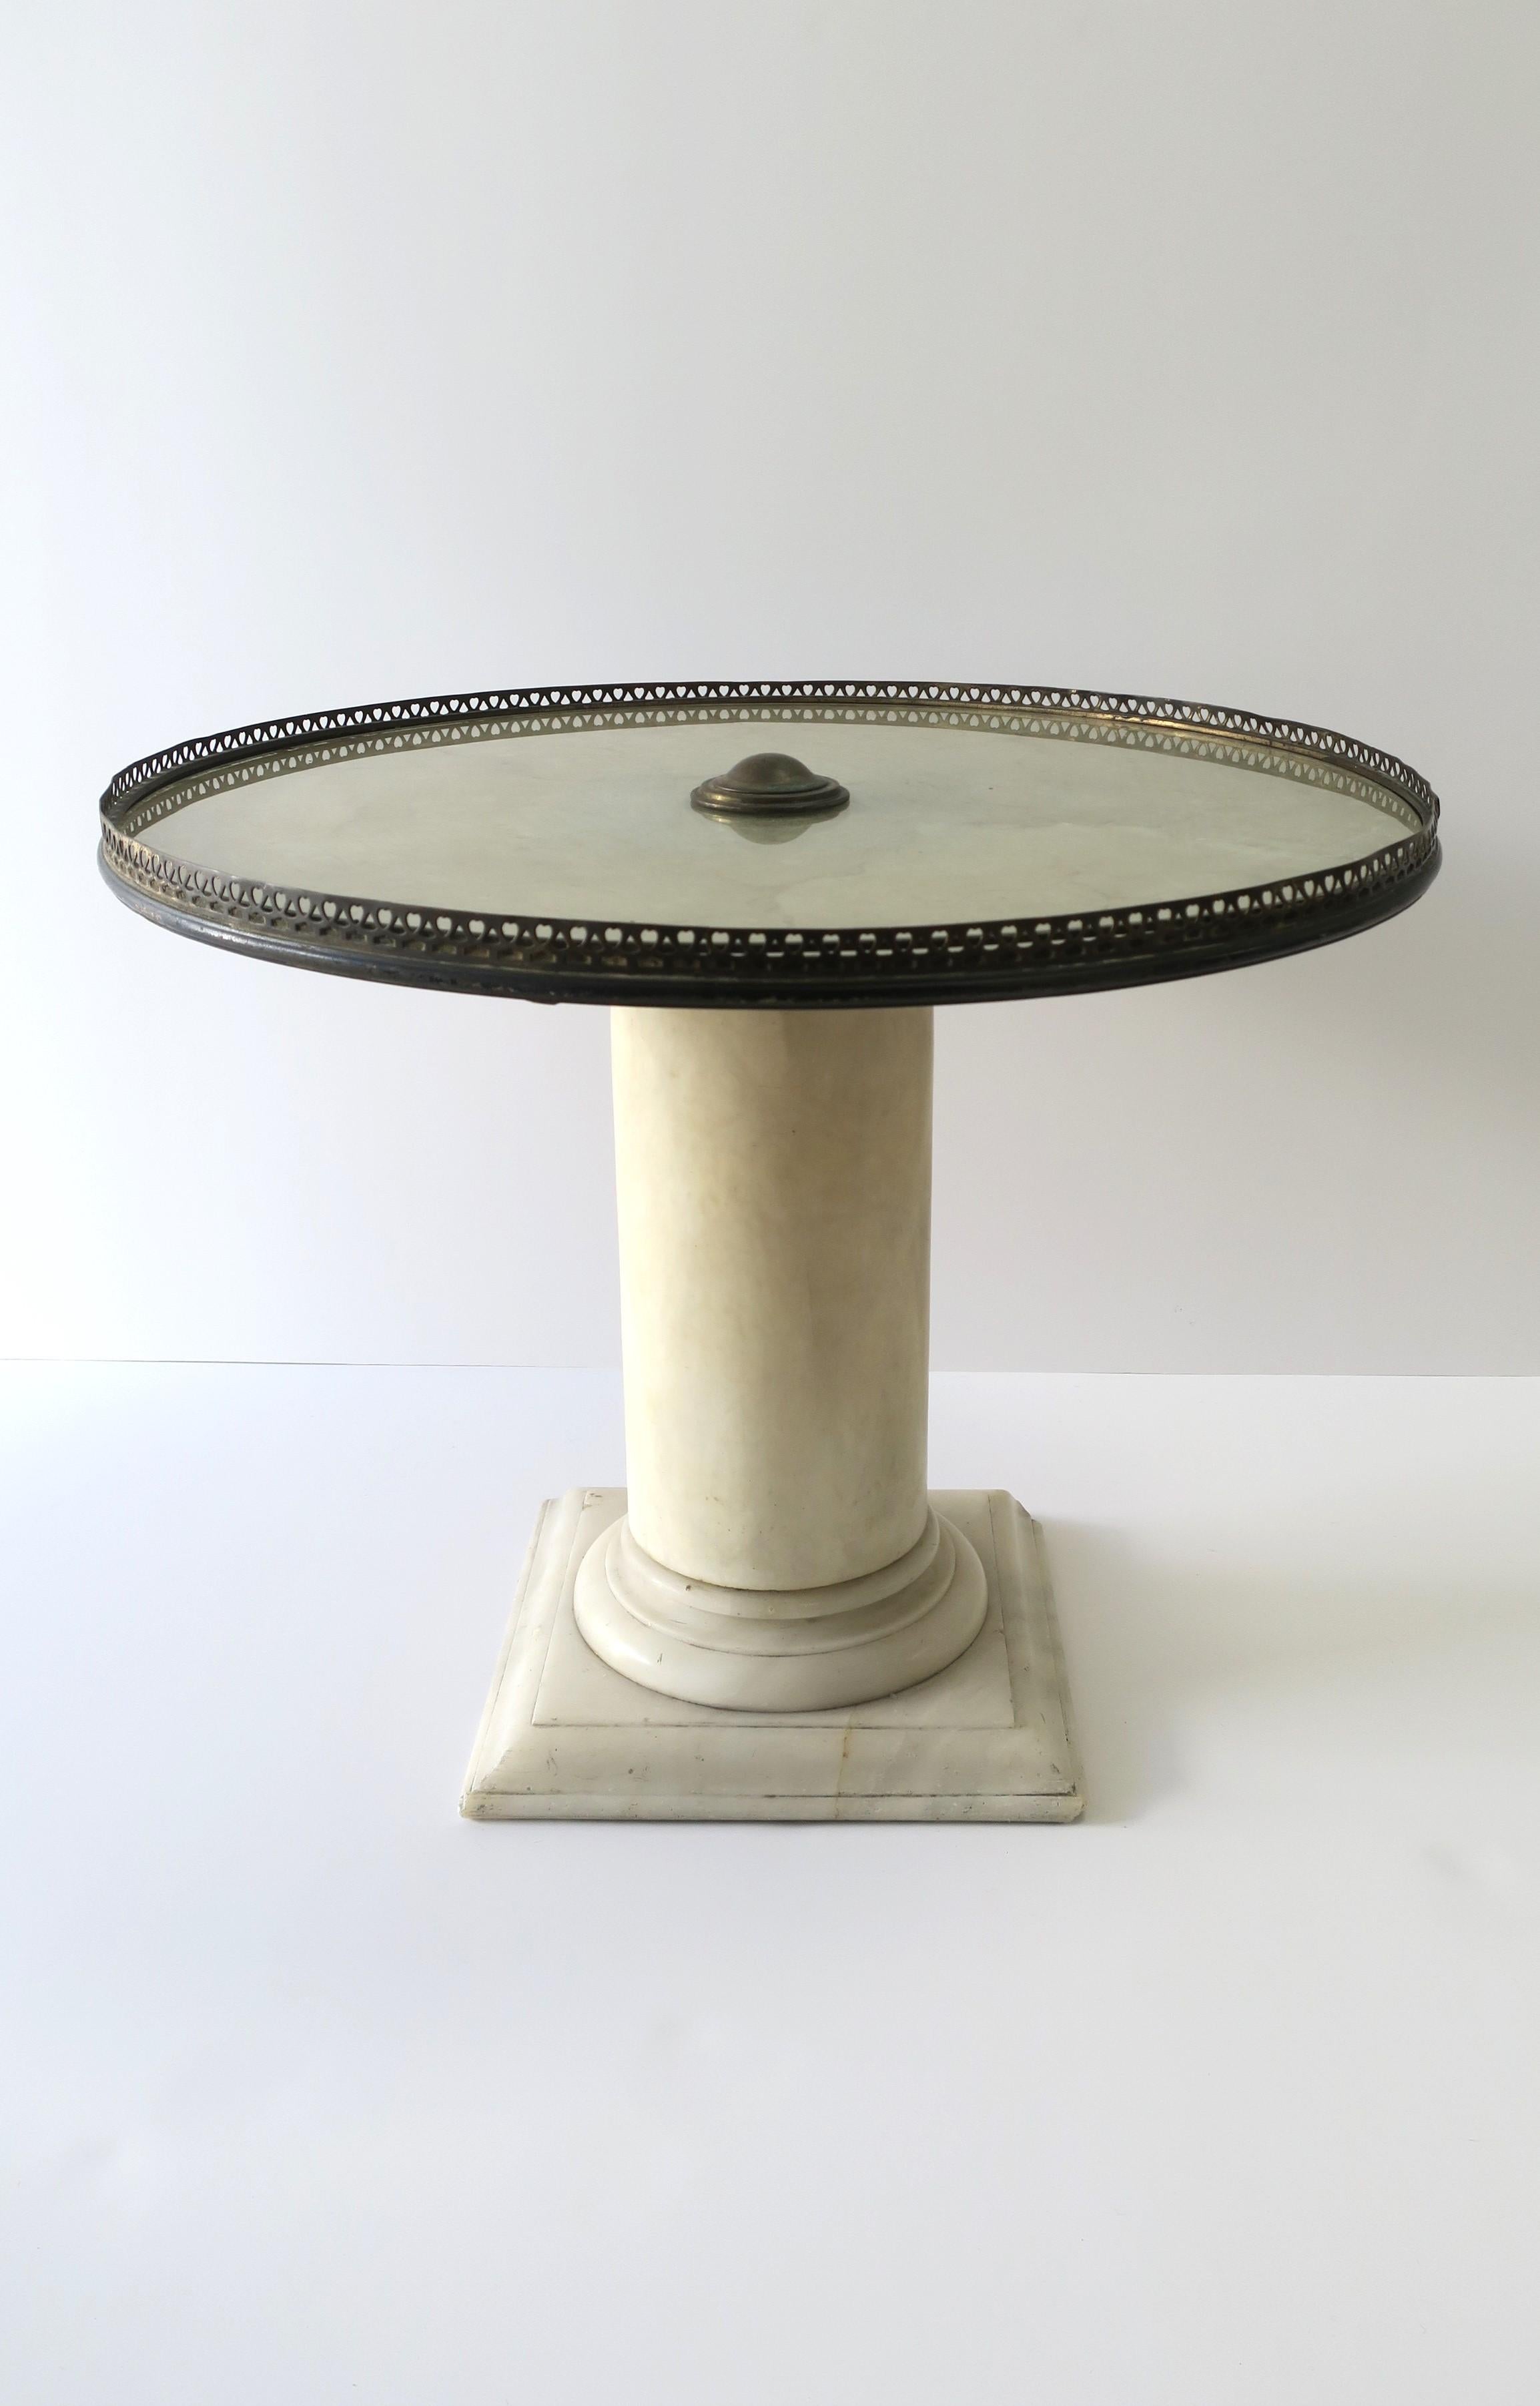 An Italian marble column side drinks cocktail table in the Neoclassical design style, circa early-20th century, Italy. Table has a solid white marble column base, glass top with a painted underside, finished with a brass knob center and perforated